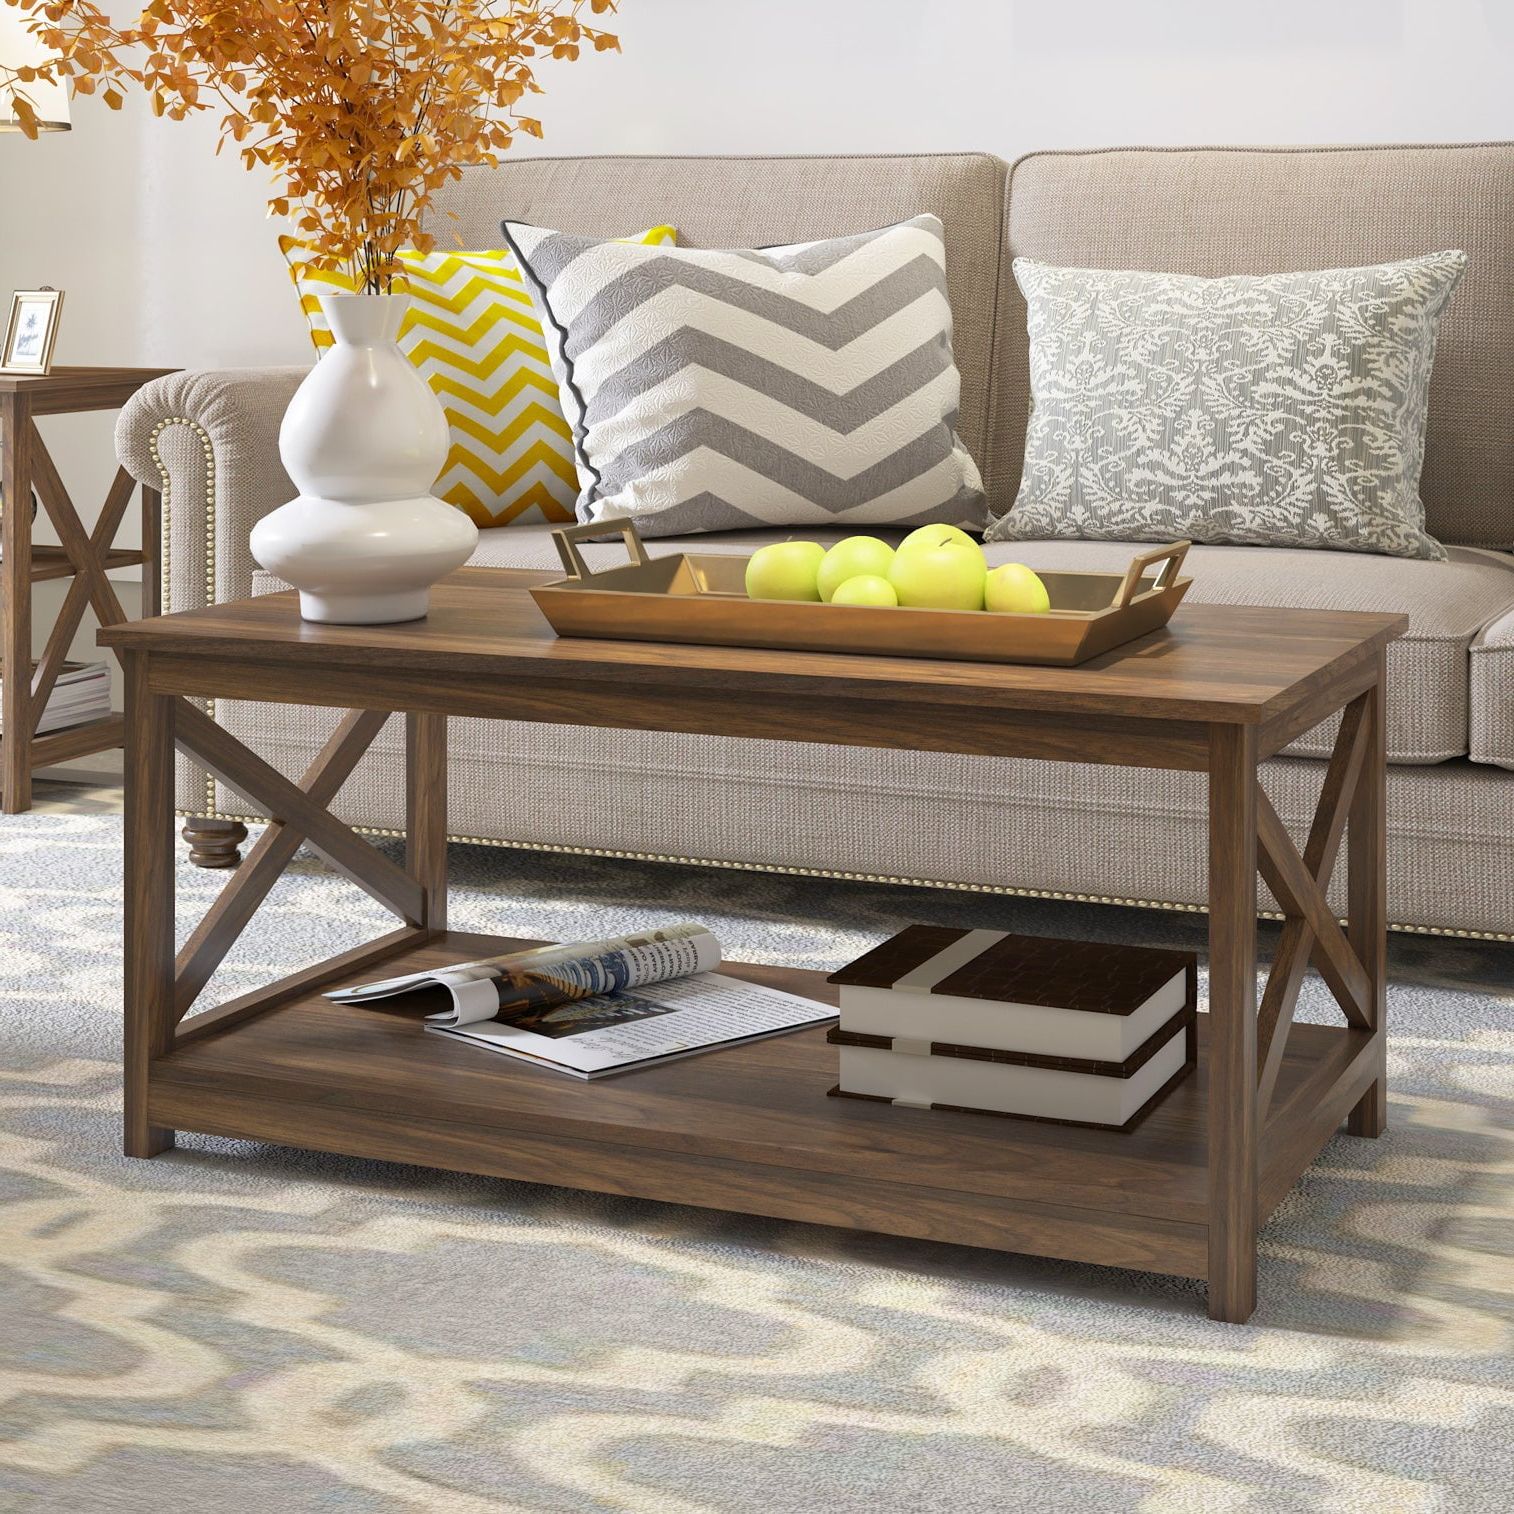 Most Recently Released Wood Coffee Tables With 2 Tier Storage With Regard To Modern Farmhouse Wood Coffee Table With 2 Tier Storage, 40 Inch, Dark  Walnut – Walmart (View 9 of 10)